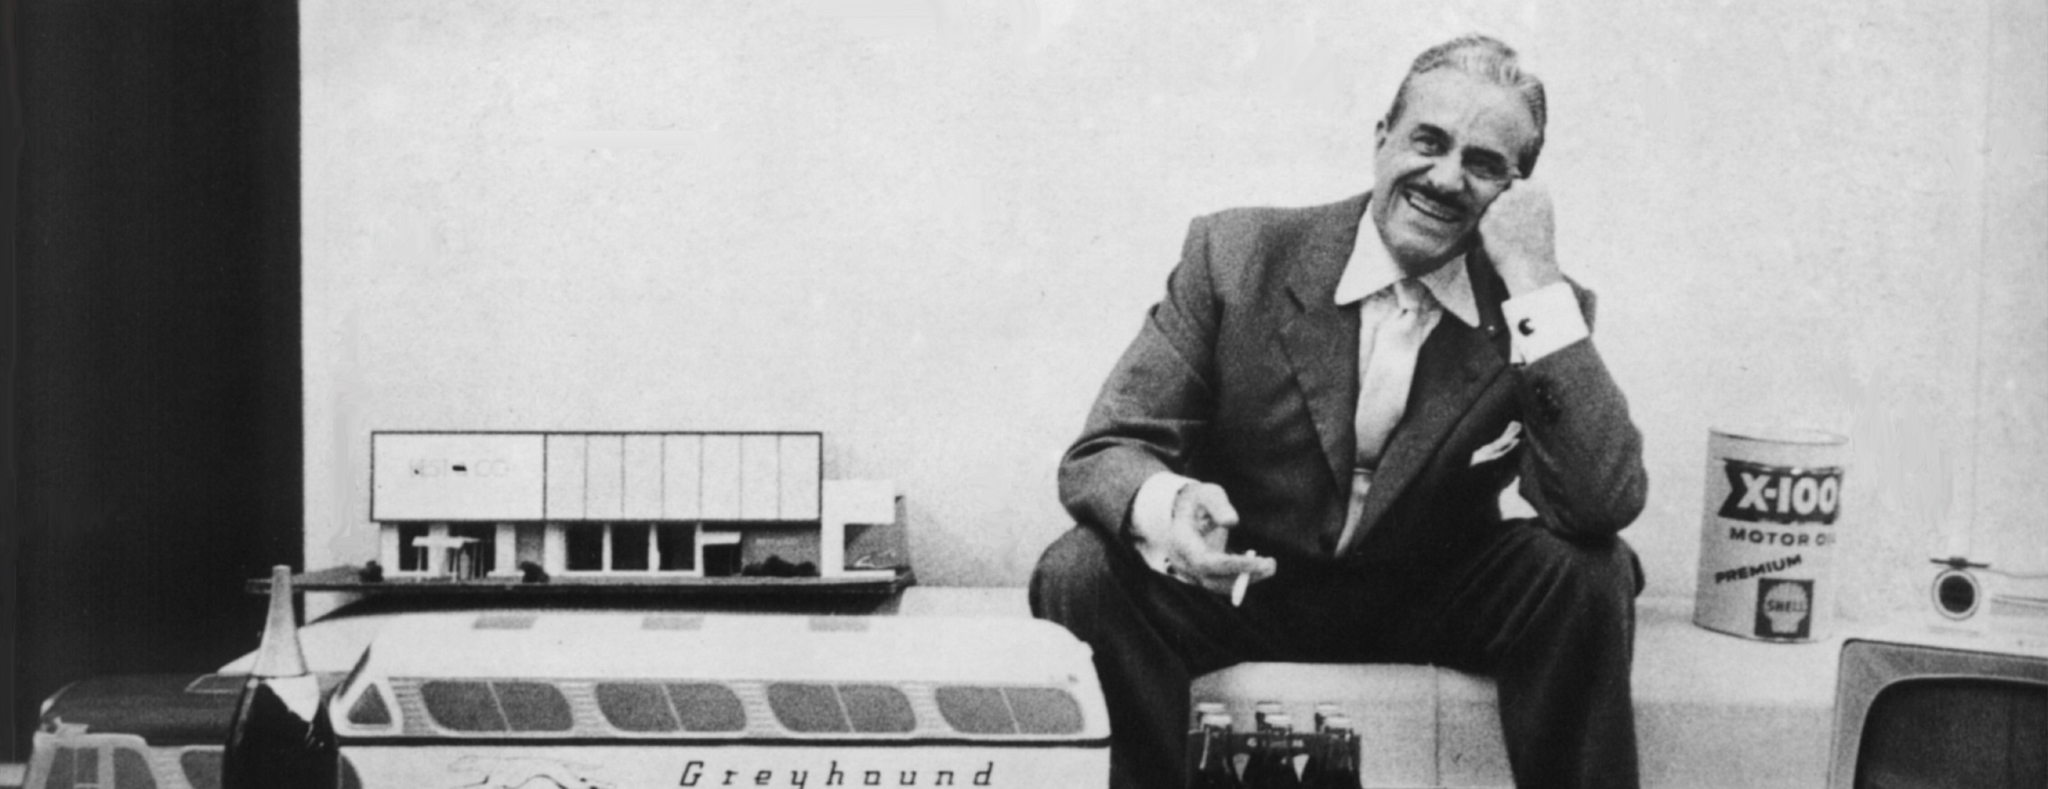 Raymond Loewy sitting with cigarette in hand and Greyhound bus model on table